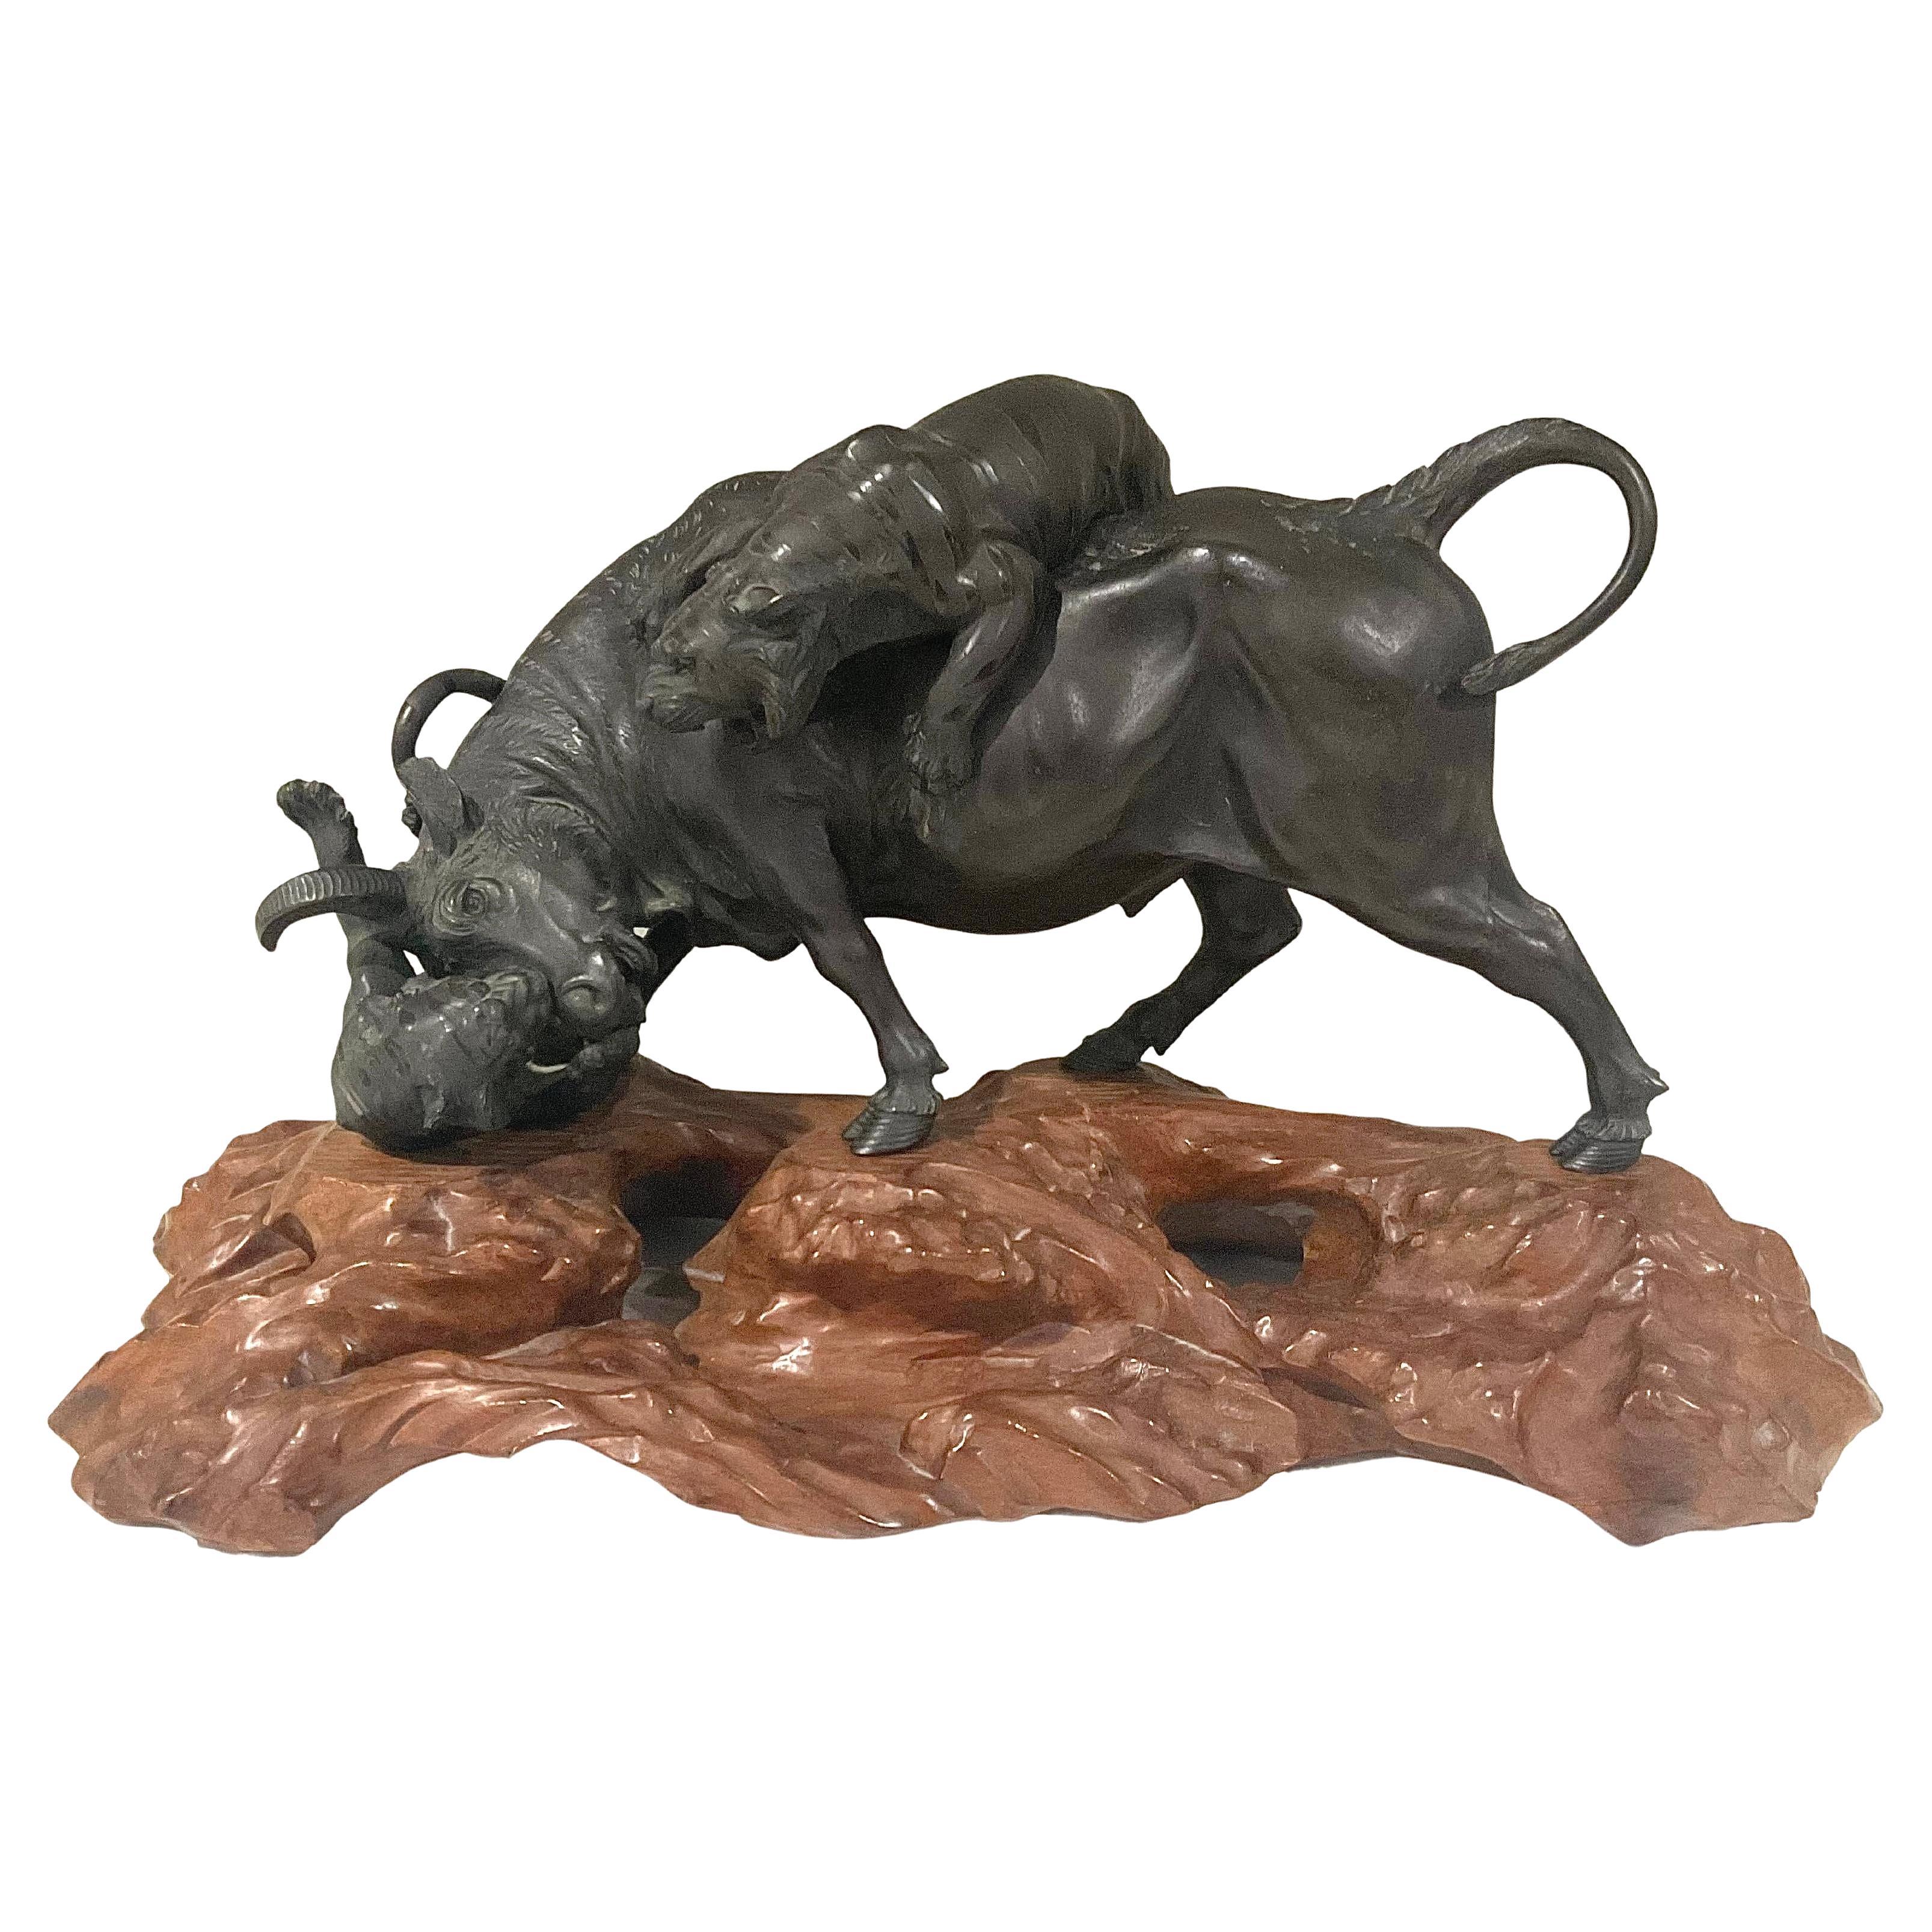 Large Artist Signed Japanese Bronze Tigers Attacking Bull Sculpture on Wood Base